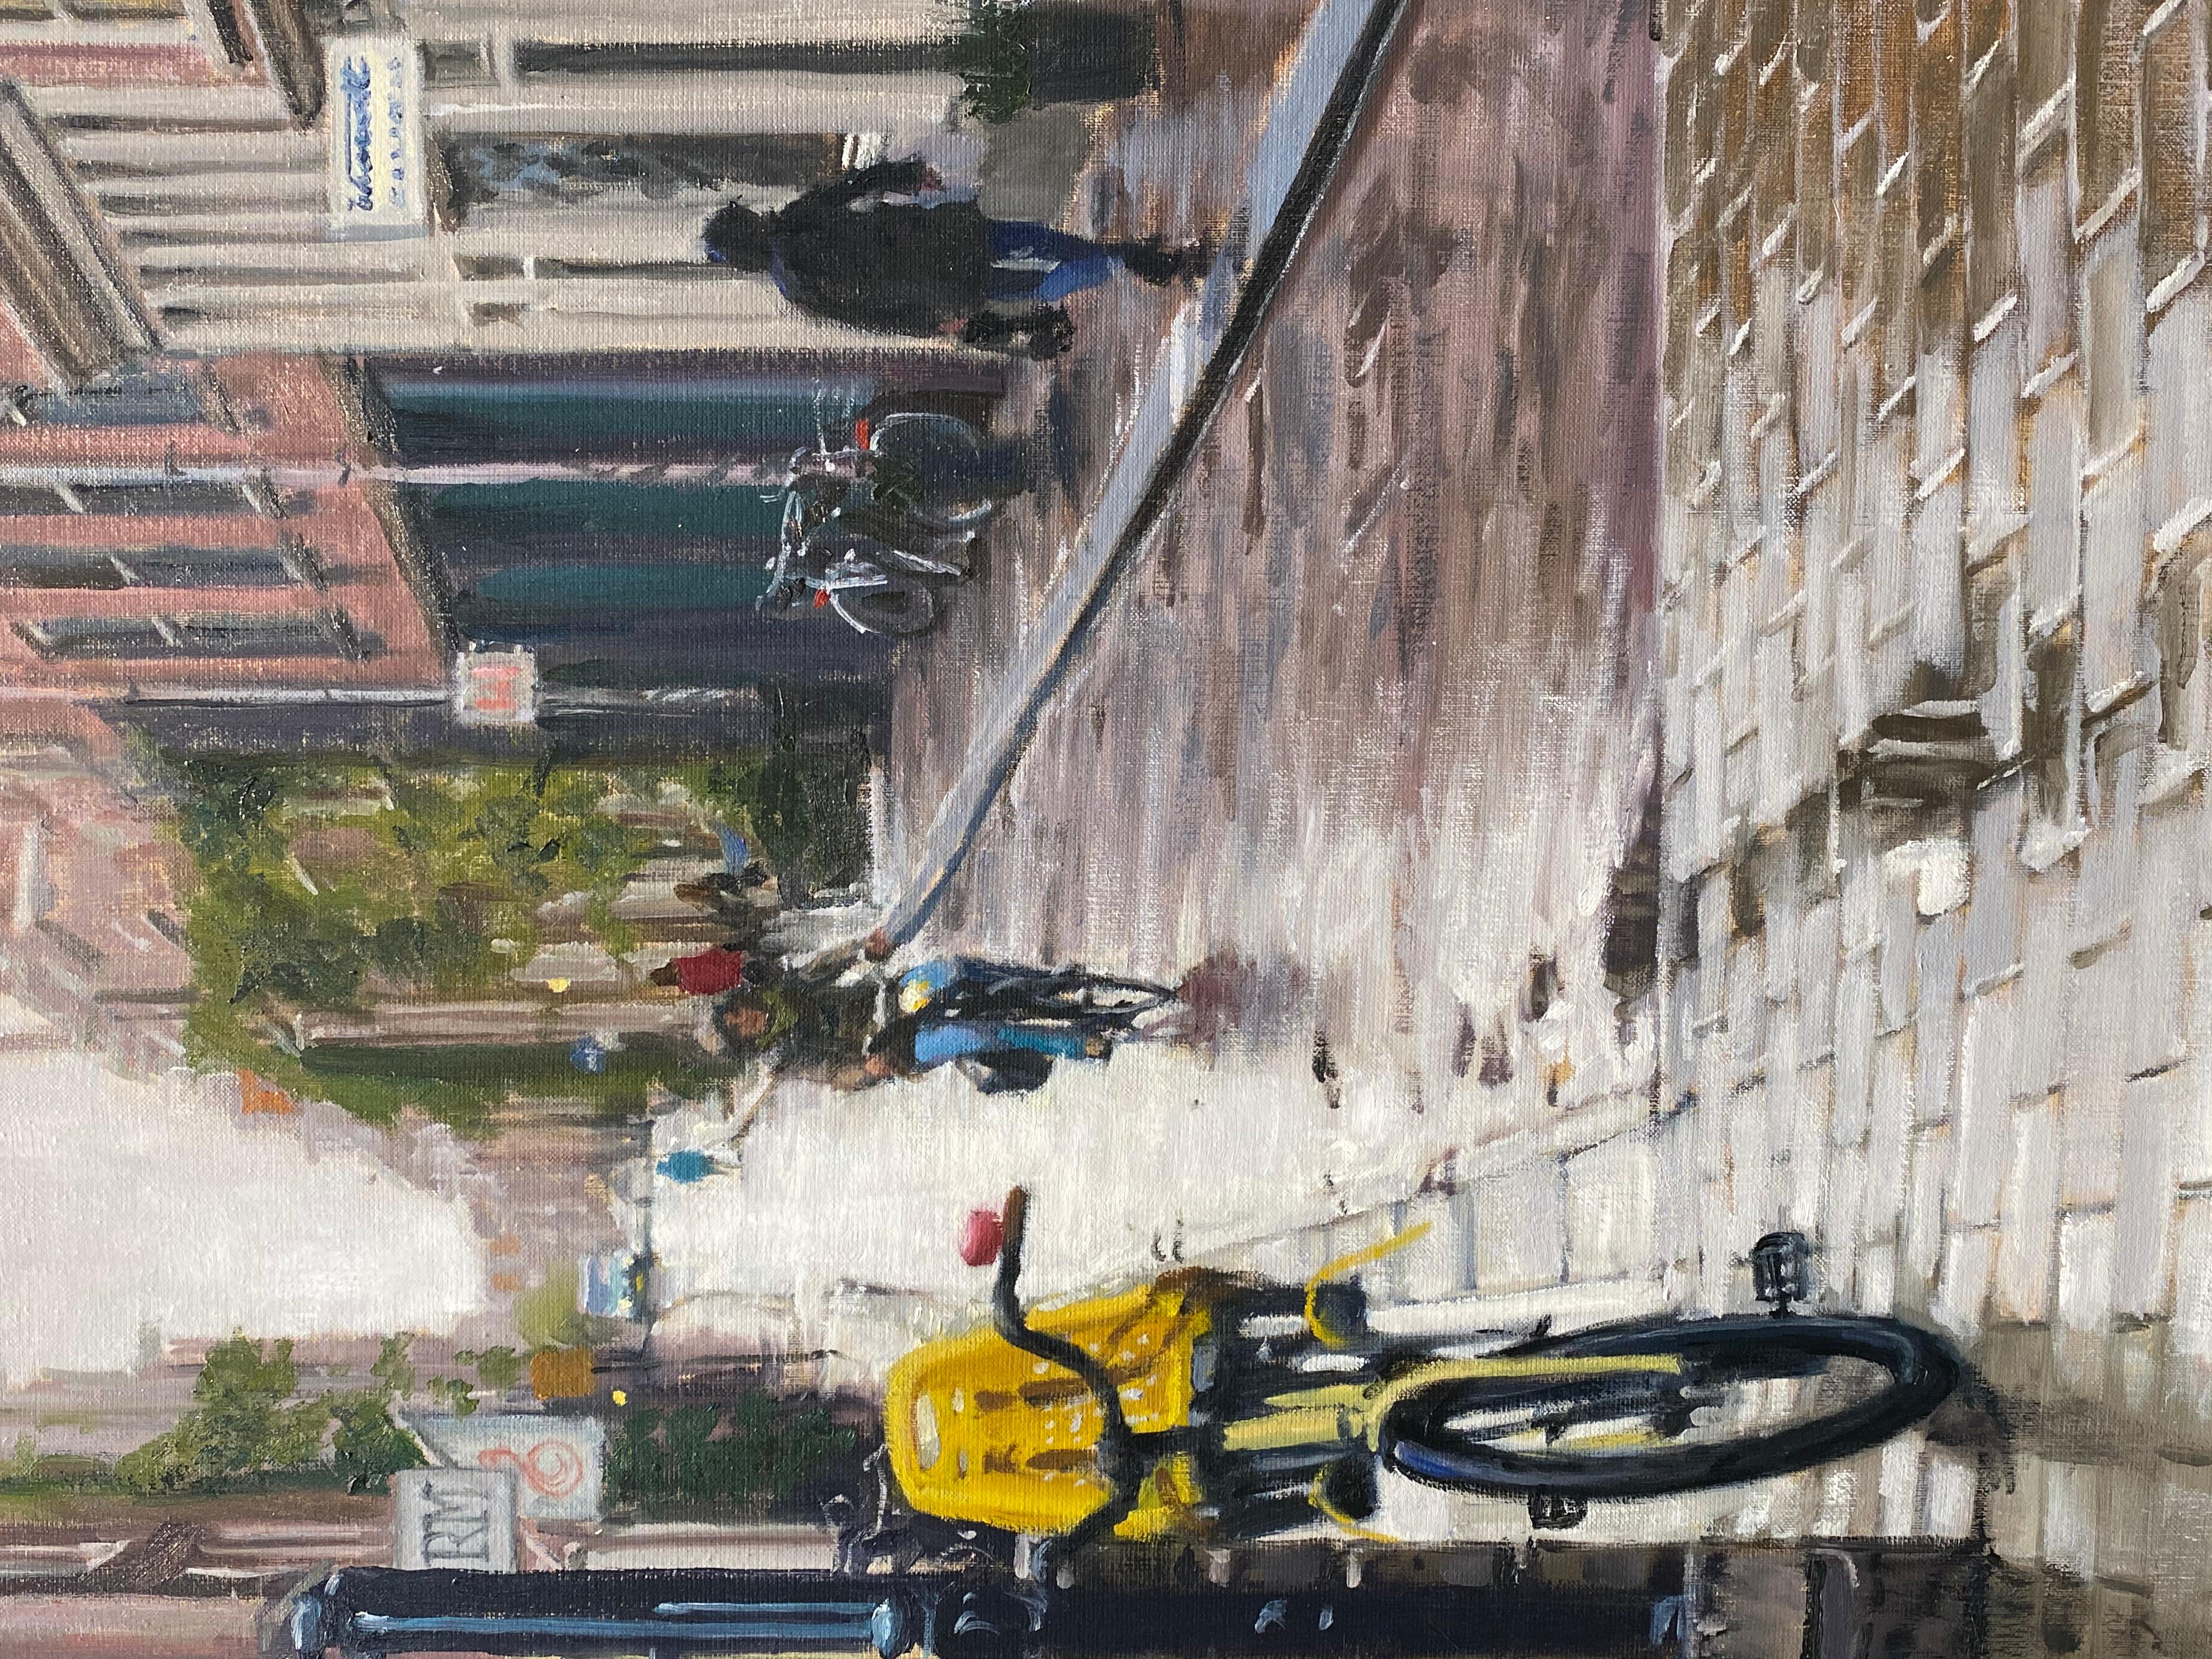 Rain in Amsterdam- 21st Century Contemporary Dutch Cityscape Oilpainting  - Gray Figurative Painting by Richard van Mensvoort